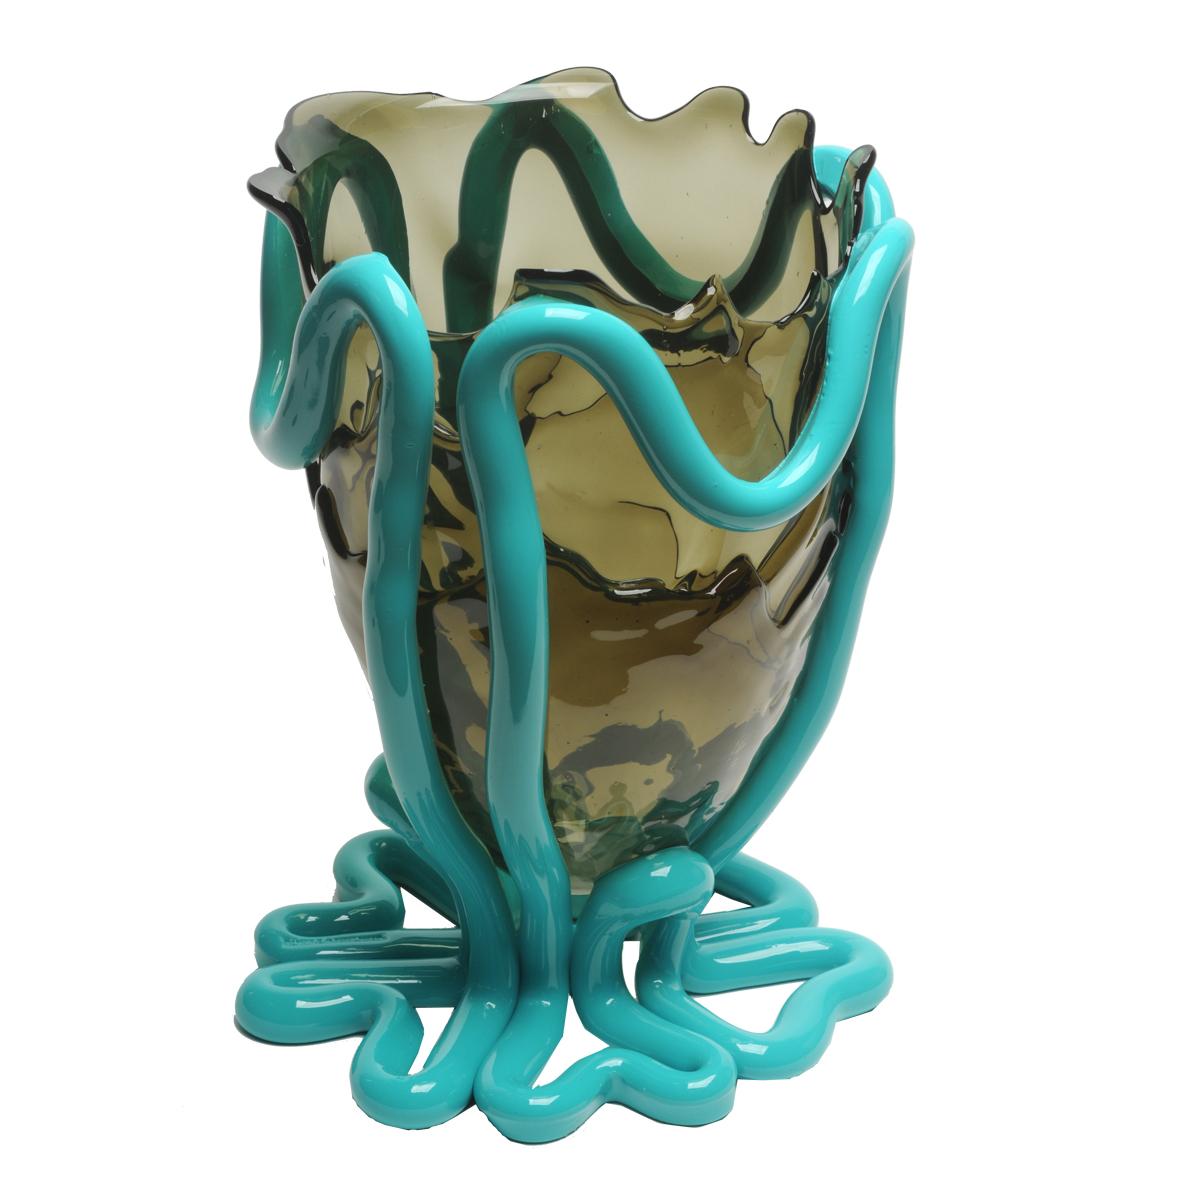 Italian Contemporary Gaetano Pesce Indian Summer L Vase Soft Resin Grey Turquoise For Sale